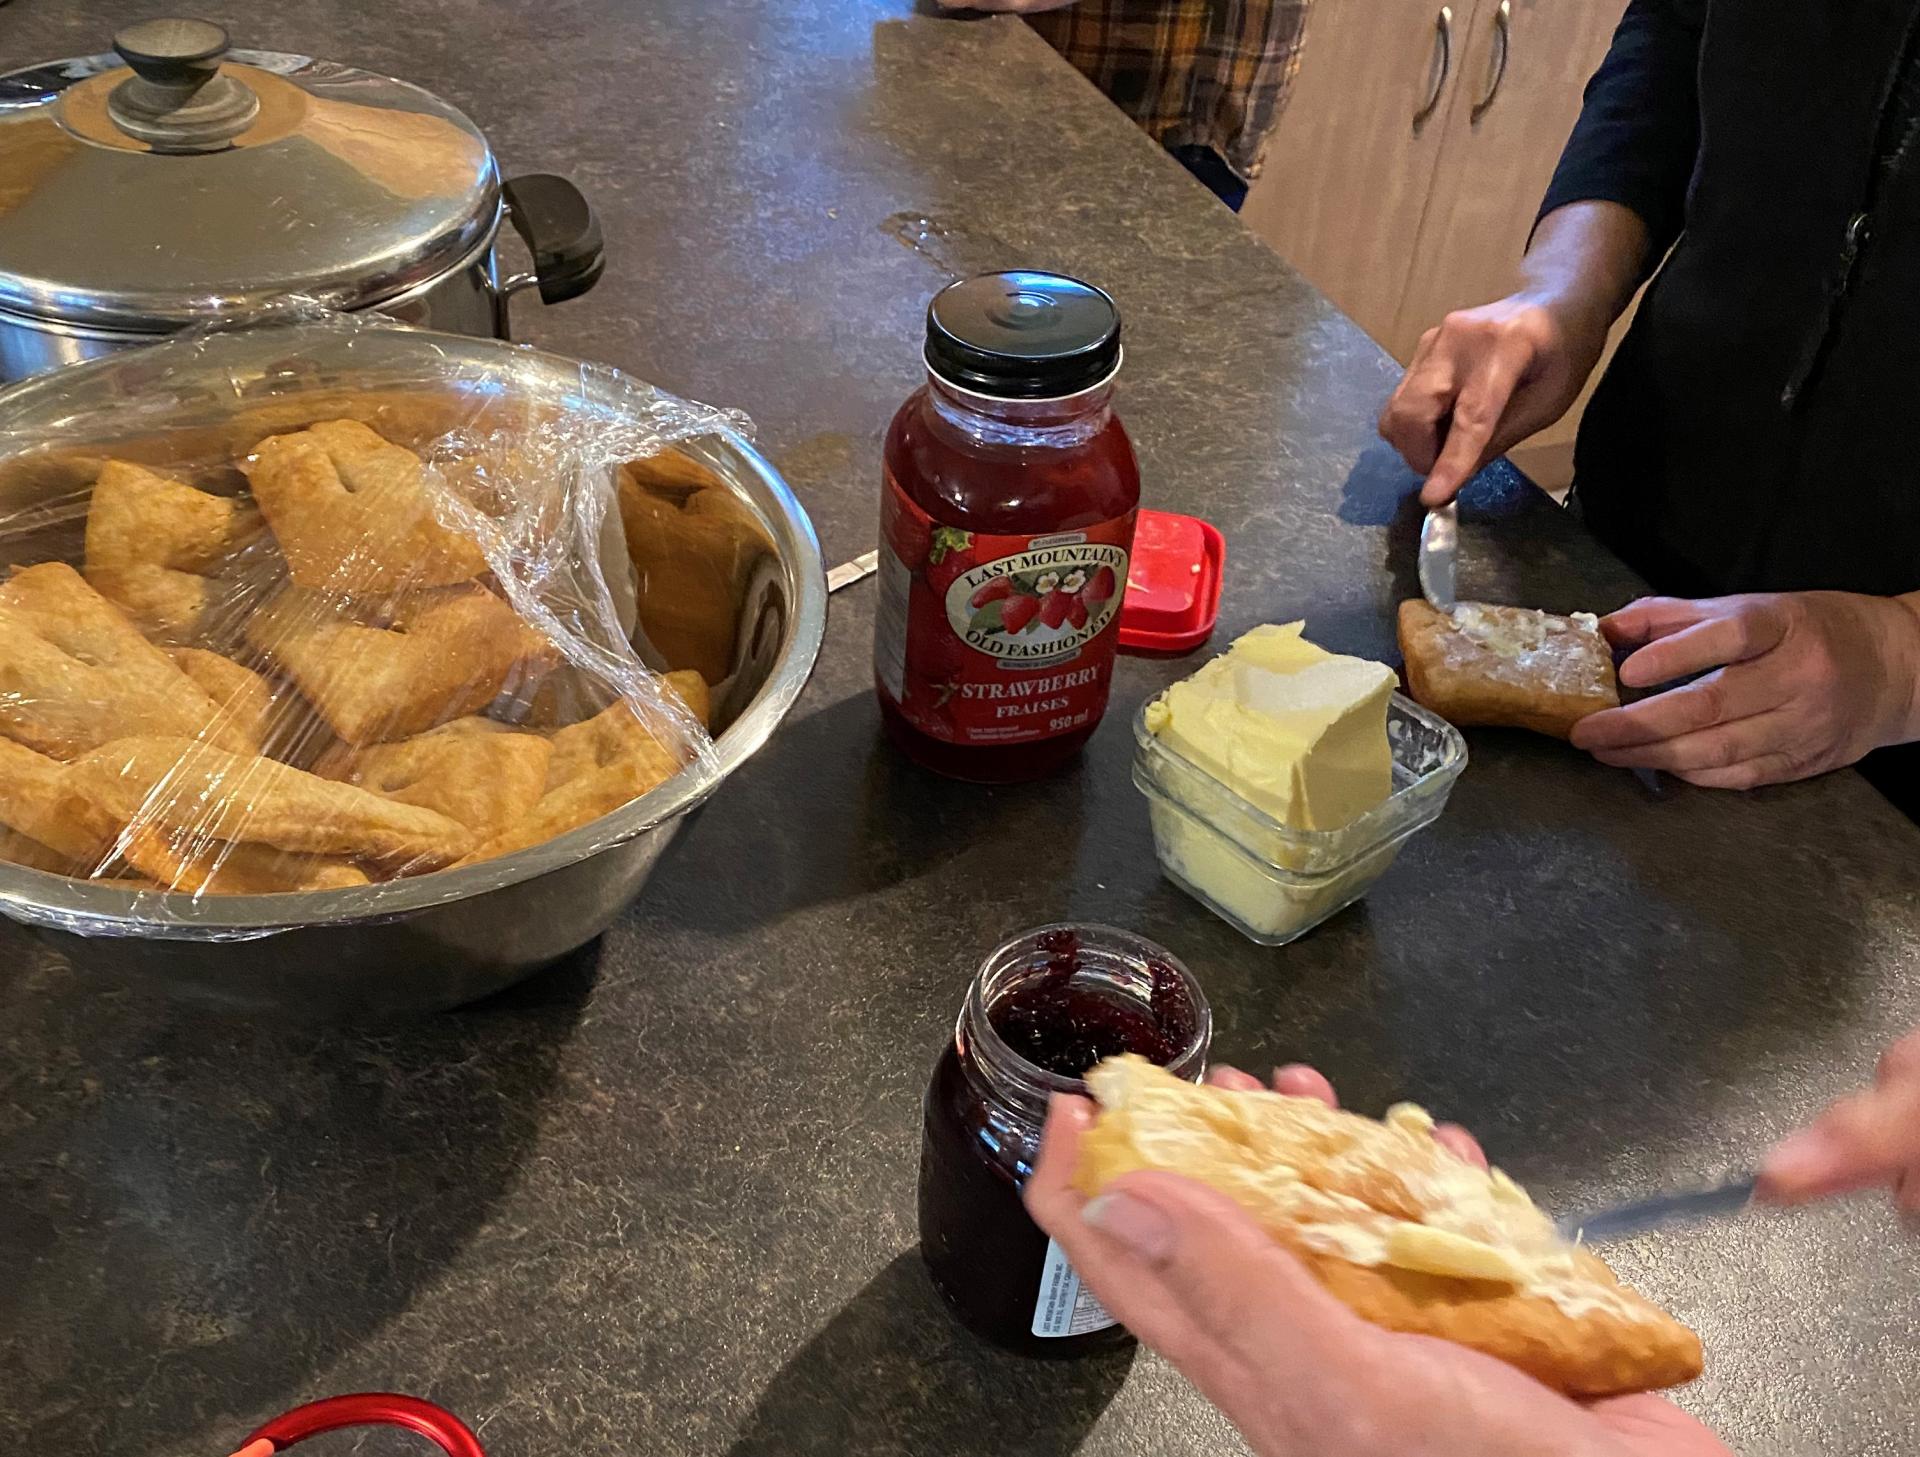 Close up of two women's hands spreading butter on fried bannock, with a bowl of bannock and jam on the counter